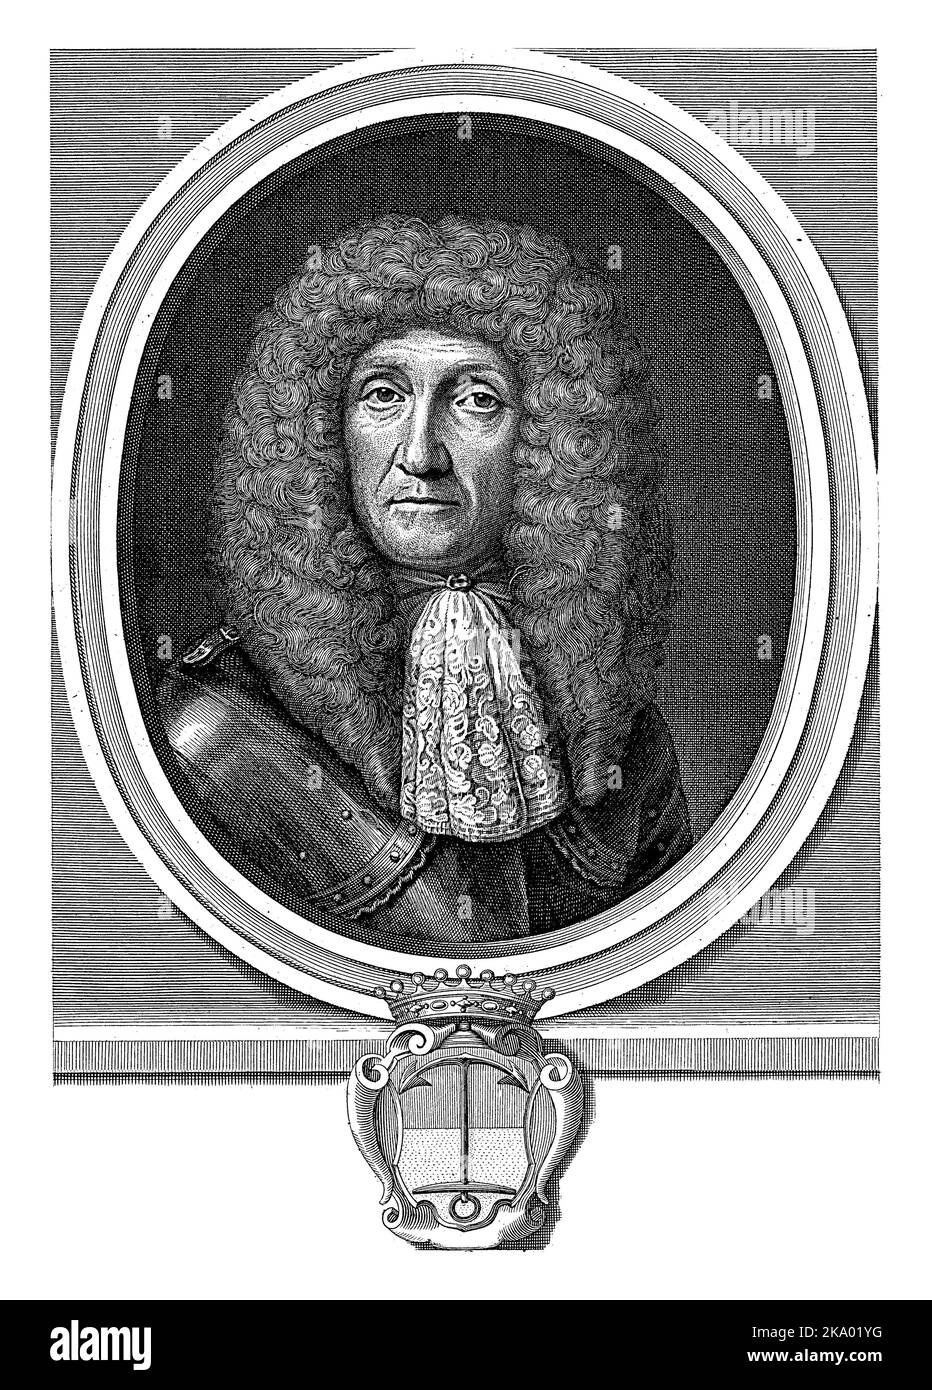 Portrait of Johan Henrik Thim, Abraham Bloteling, after Andreas Stech, in or after 1677 - 1690 Bust of Johan Henrik Thim, director-general at the VOC. Stock Photo